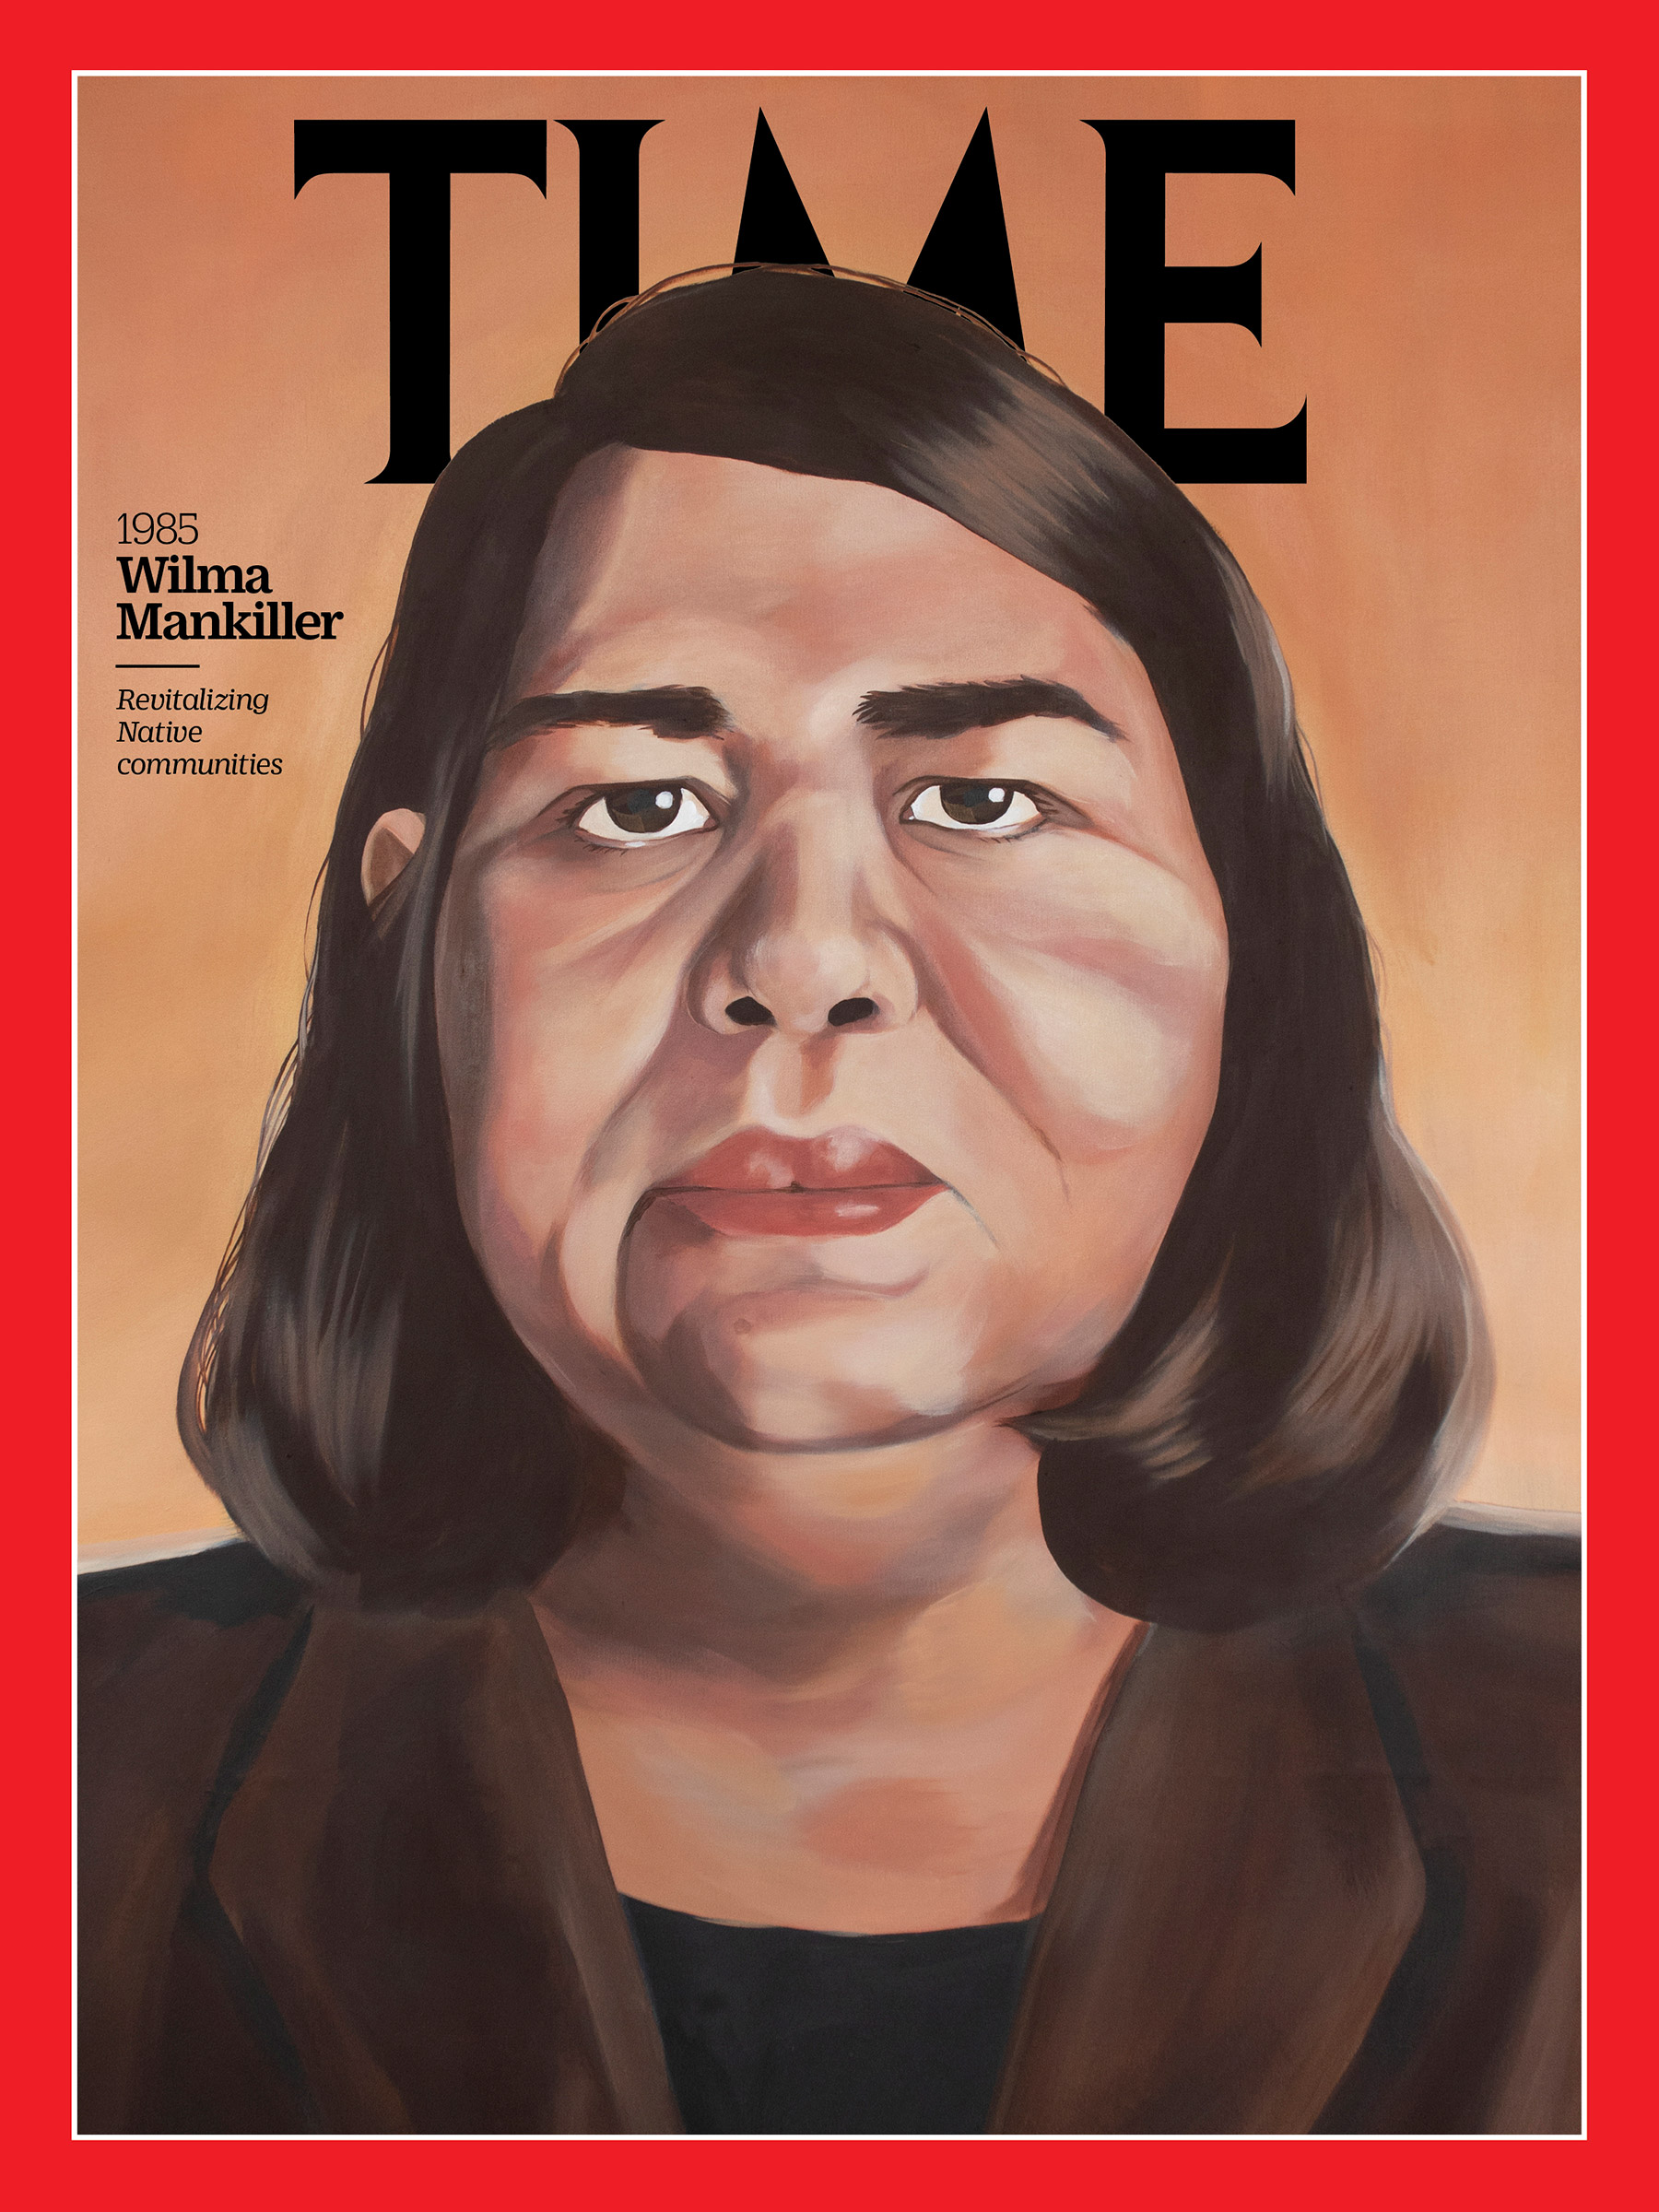 <a href="https://fineartamerica.com/featured/wilma-mankiller-1985-time.html"><strong>Buy the cover art→</strong></a> (Painting by Lauren Crazybull for TIME)